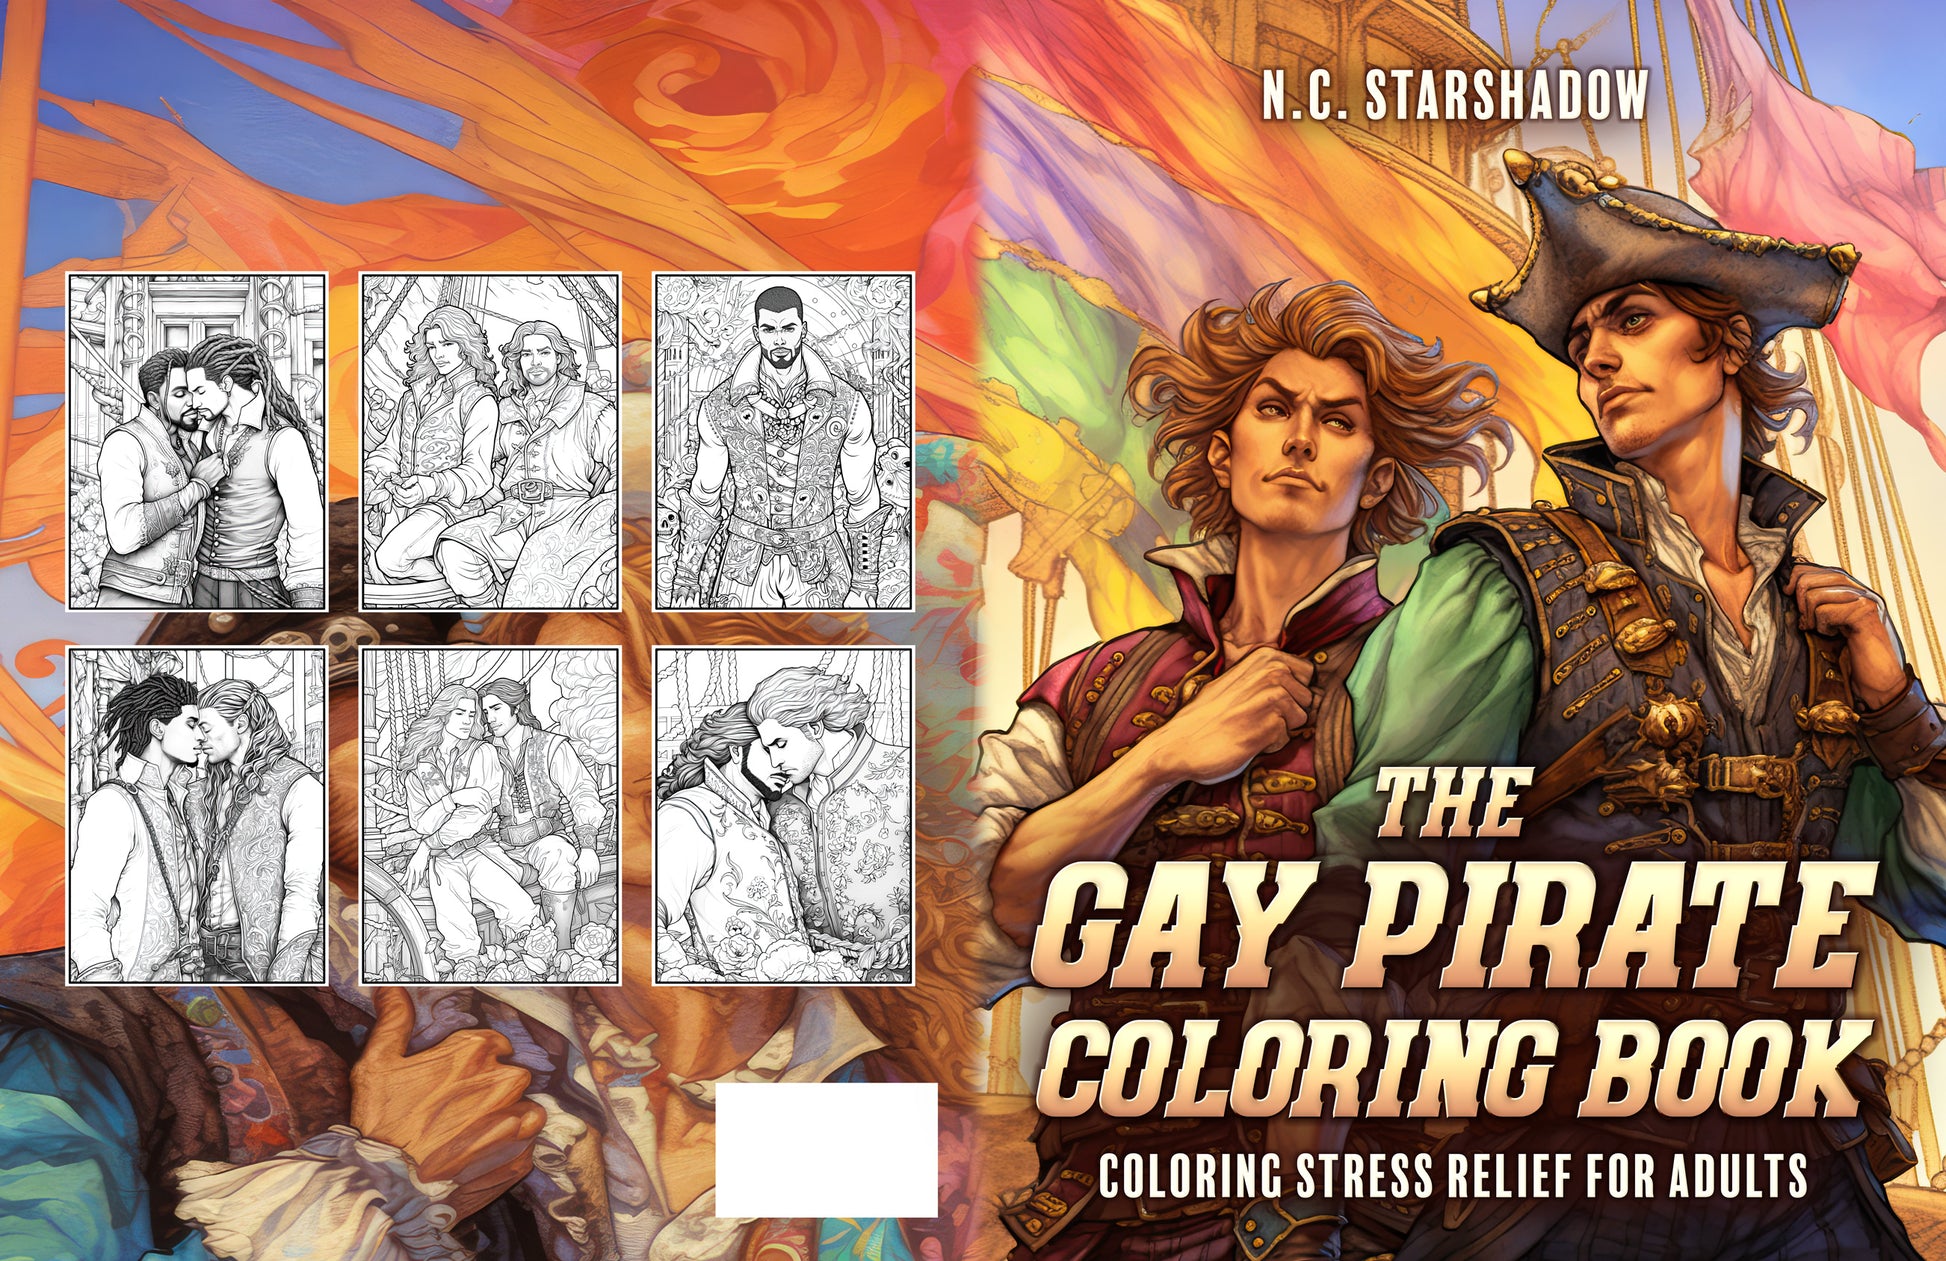 Experience the joy and excitement of "The Gay Pirate Coloring Book" (Paperback) by N.C. Starshadow, featuring romantic gay pirates.